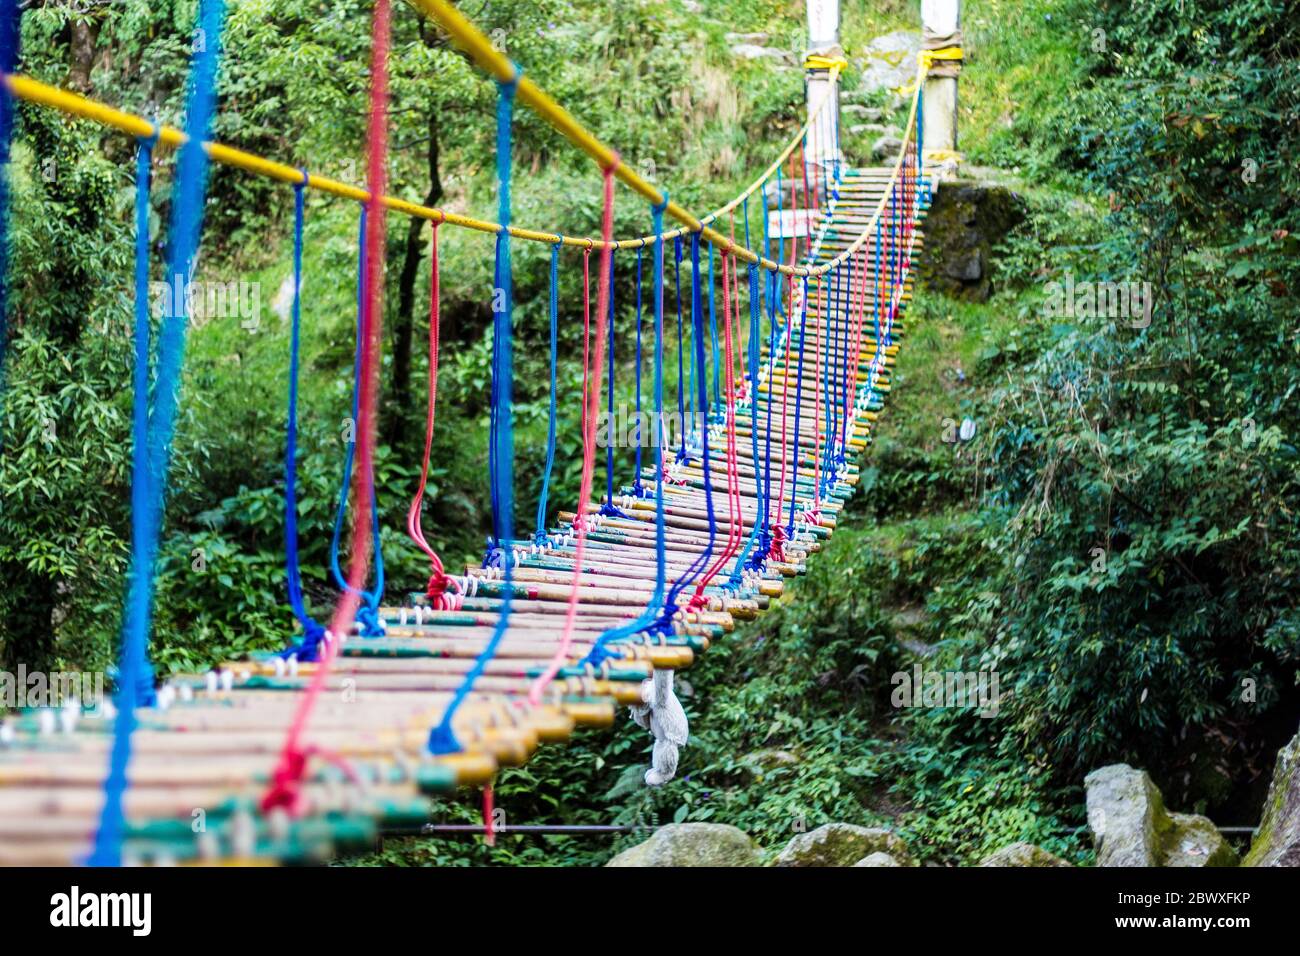 A hanging rope bridge over the waterfall in Panchpula Dalhousie, Himachal Pradesh India. It's for adventure activities for kids and teenagers. Stock Photo